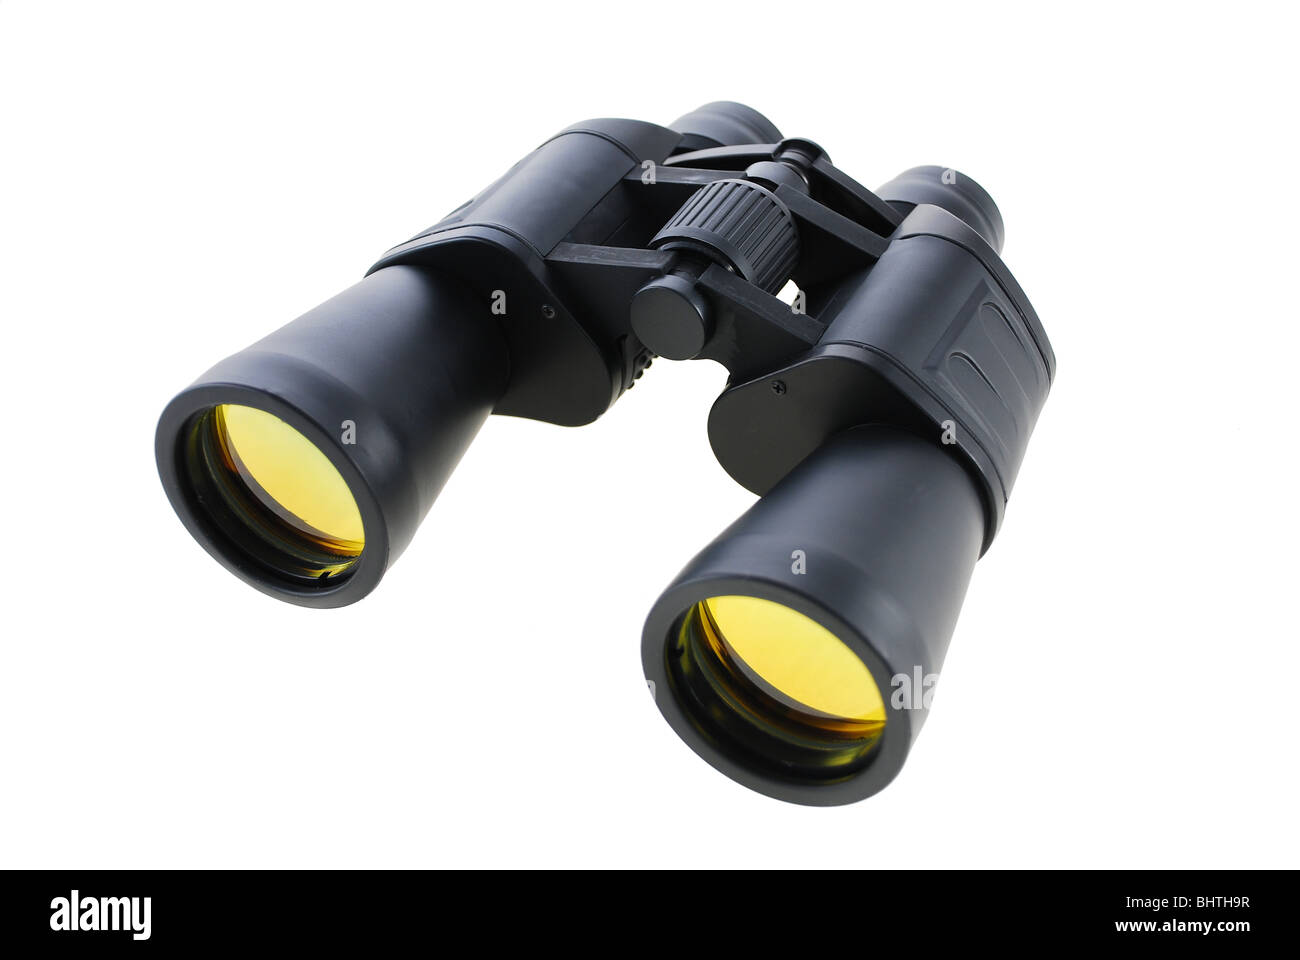 A pair of binoculars on a clean white background Stock Photo